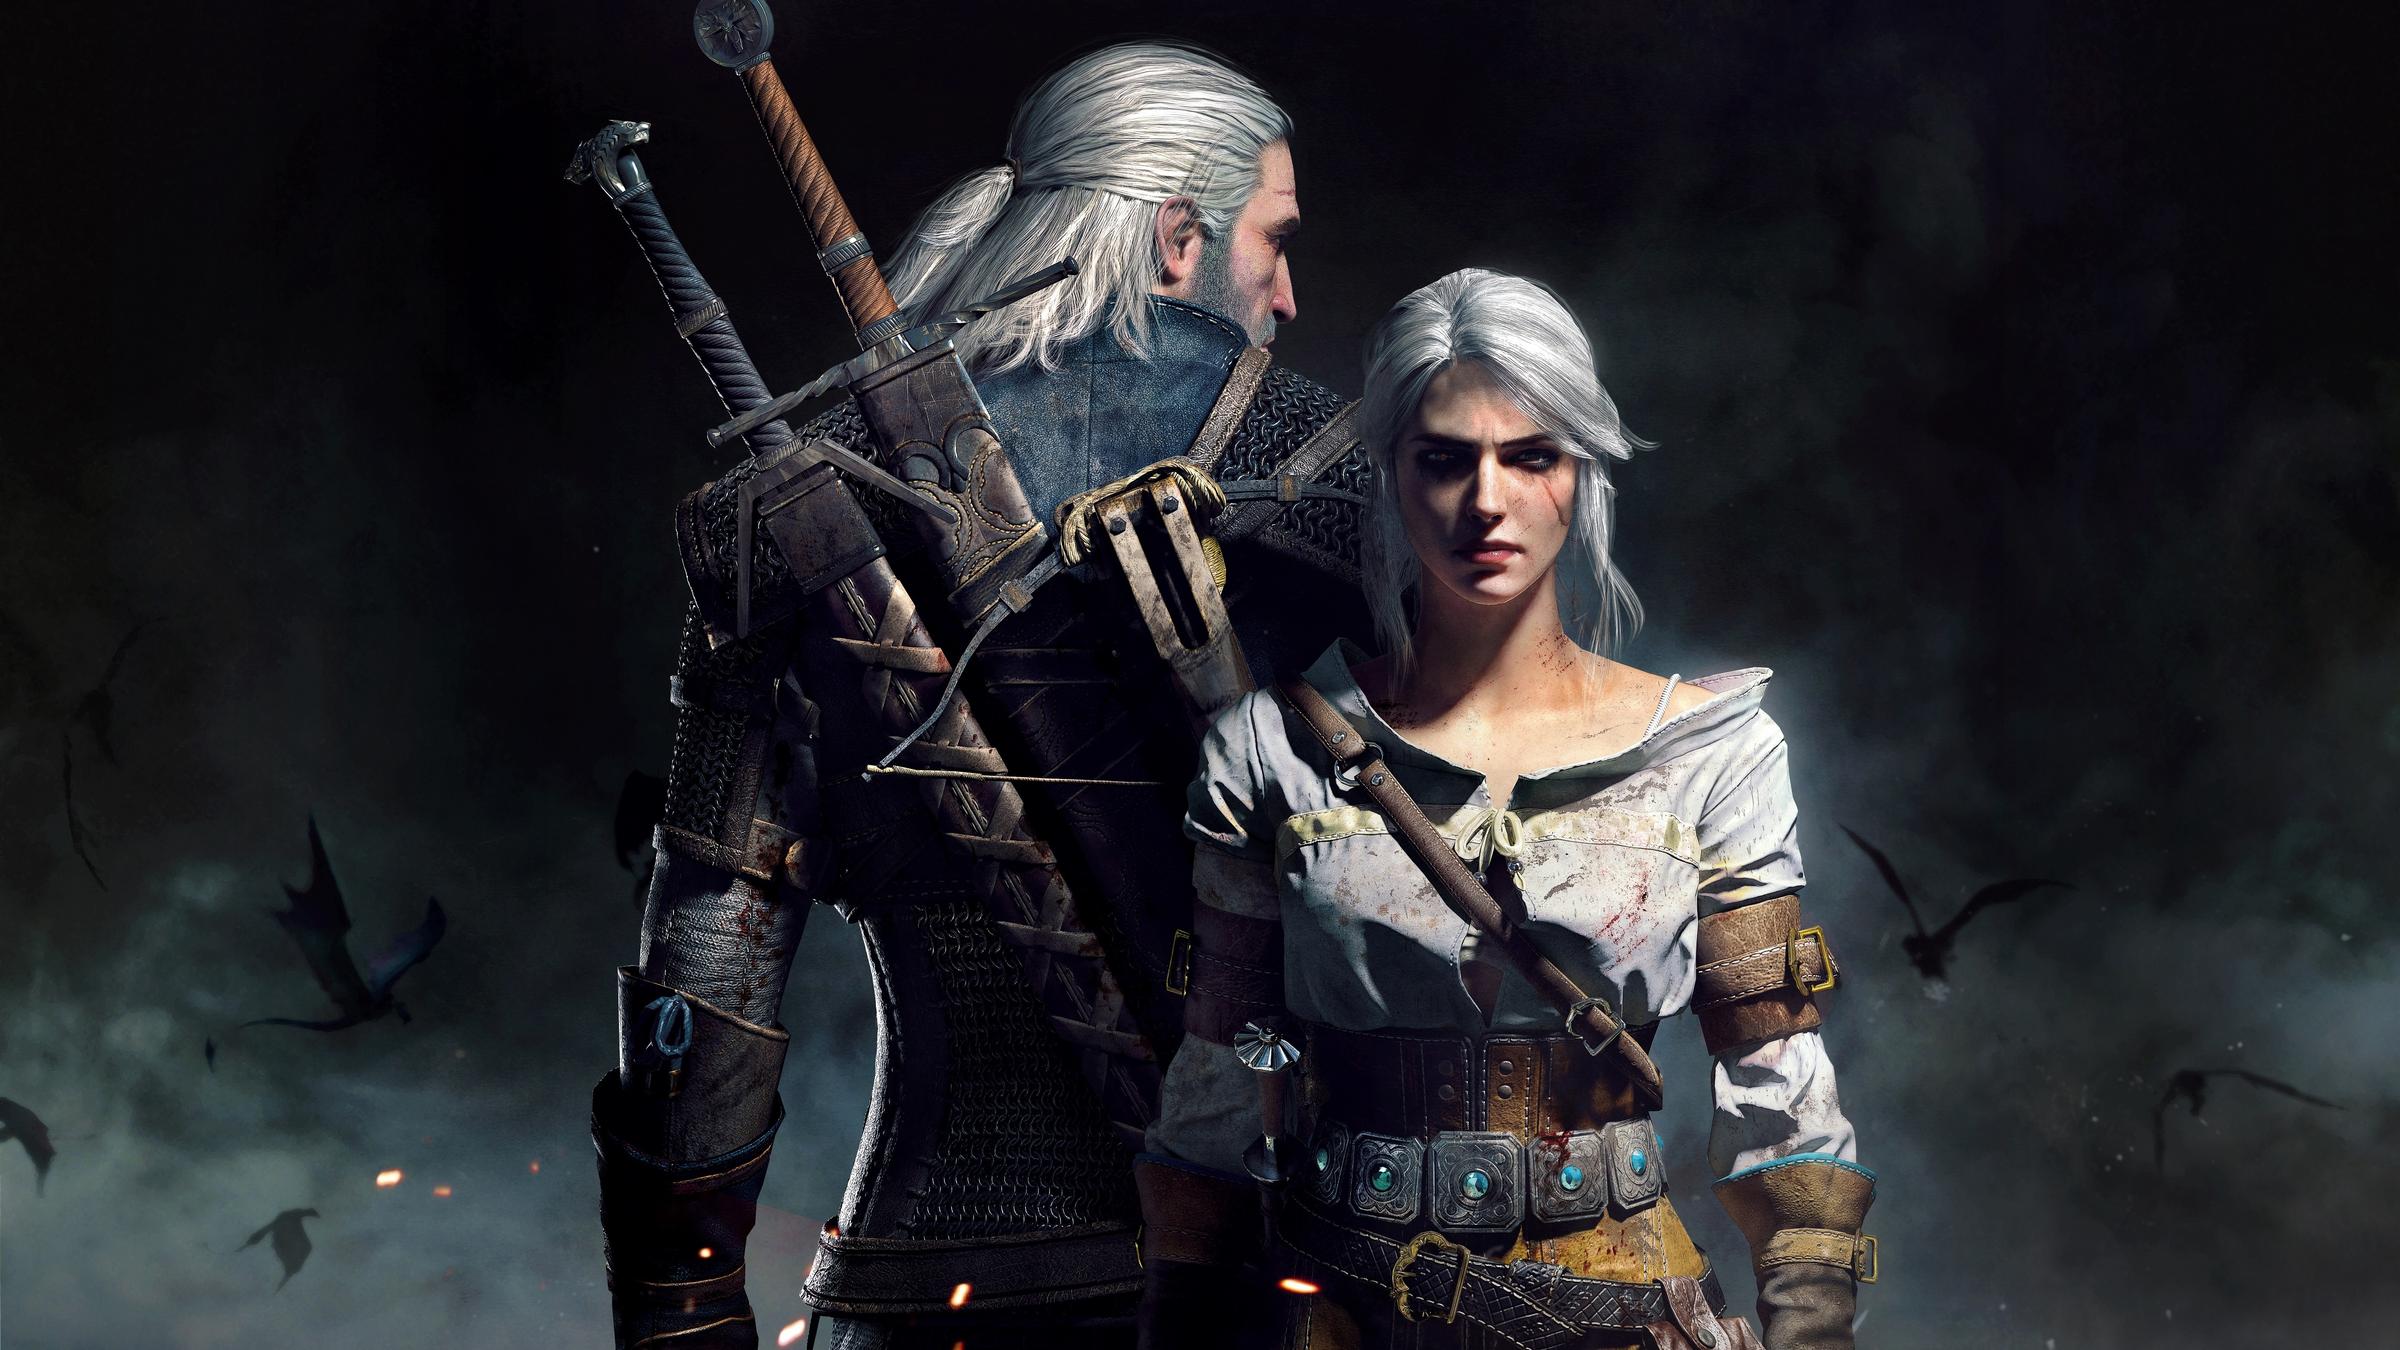 Image for The Witcher 3 has passed 20m lifetime sales